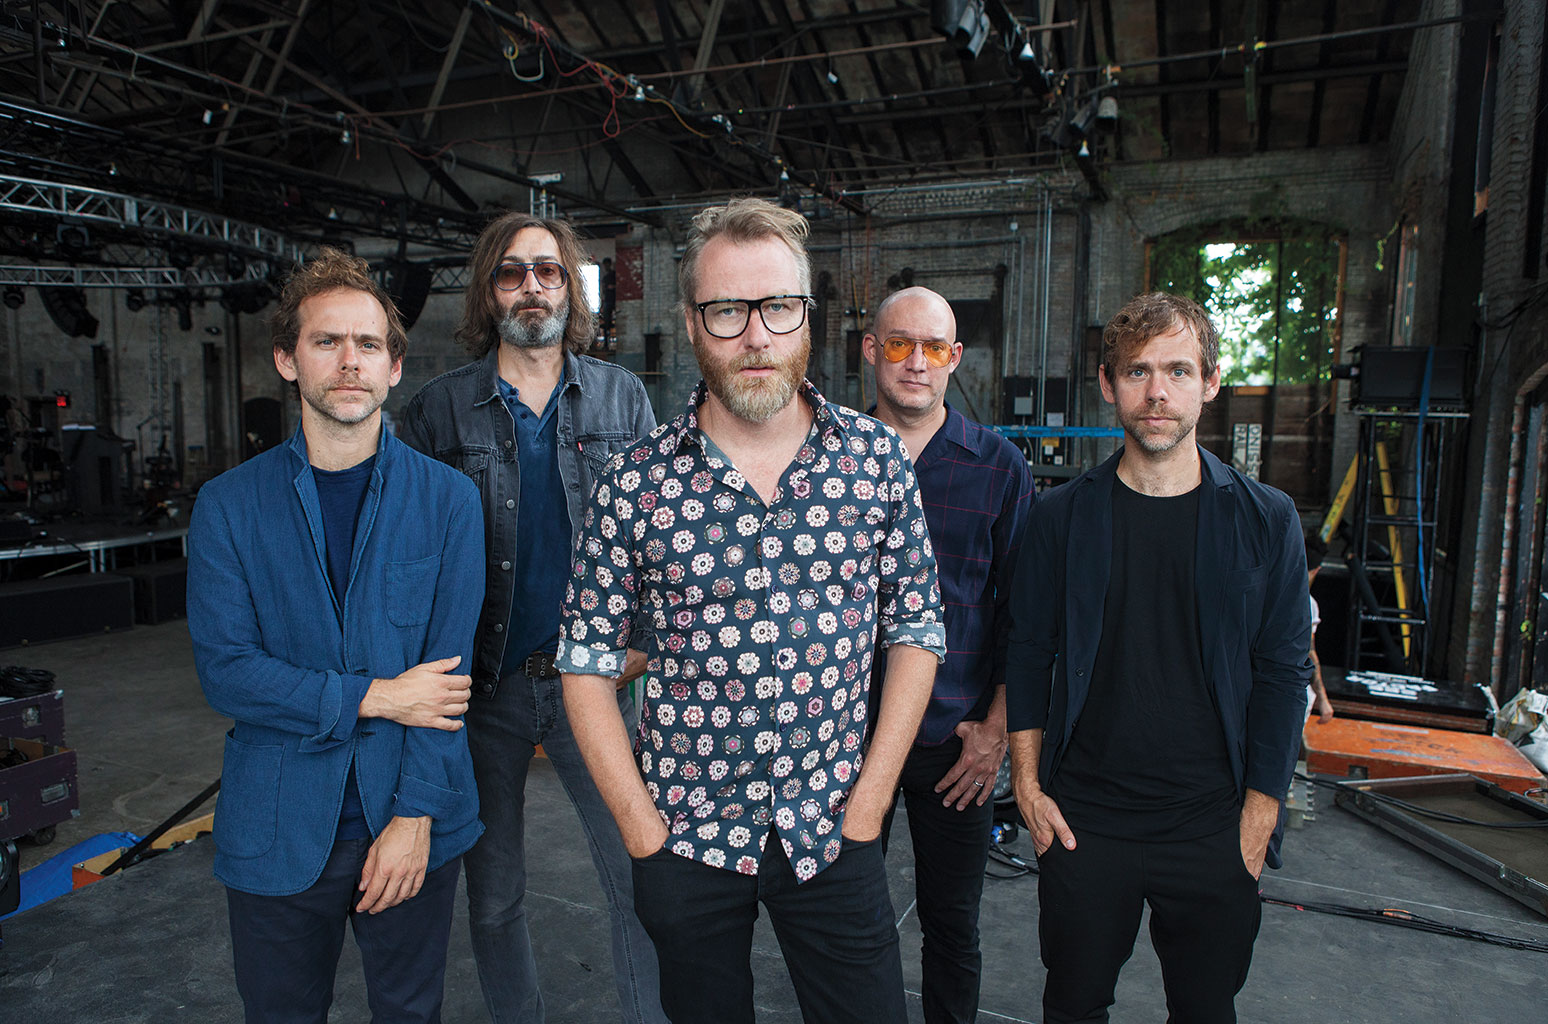 The National at Madison Square Garden